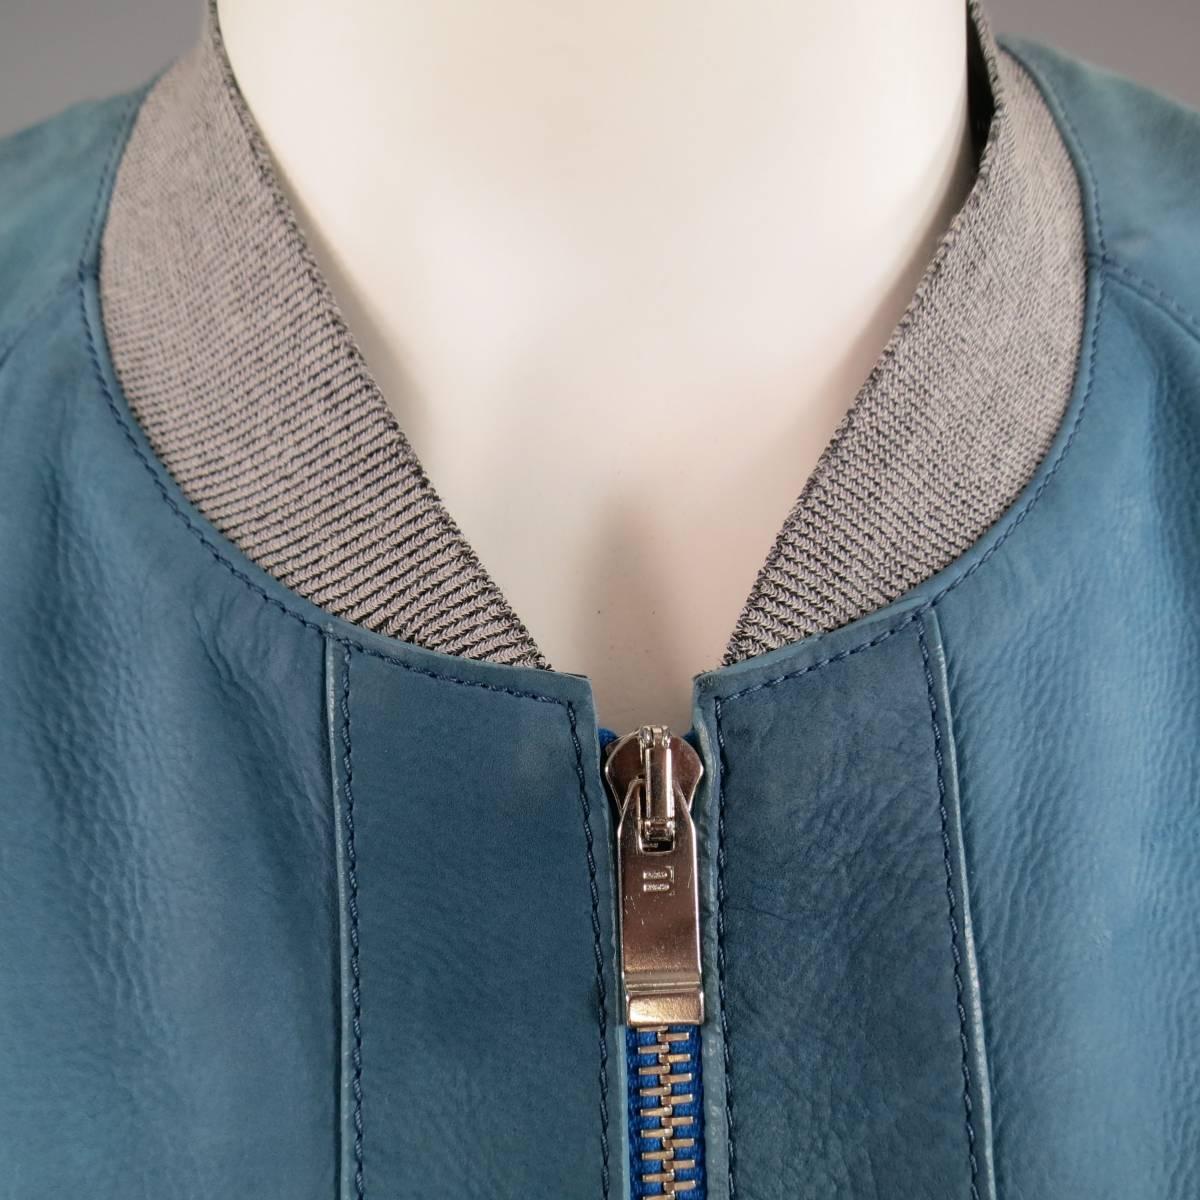 This rare BALENCIAGA bomber jacket comes in a soft teal blue matte leather with a nubuck feel and features a blue zipper front with silver tone hardware, Heather gray stretch cuffs, waistband, and collar, and double front pockets. Wear throughout